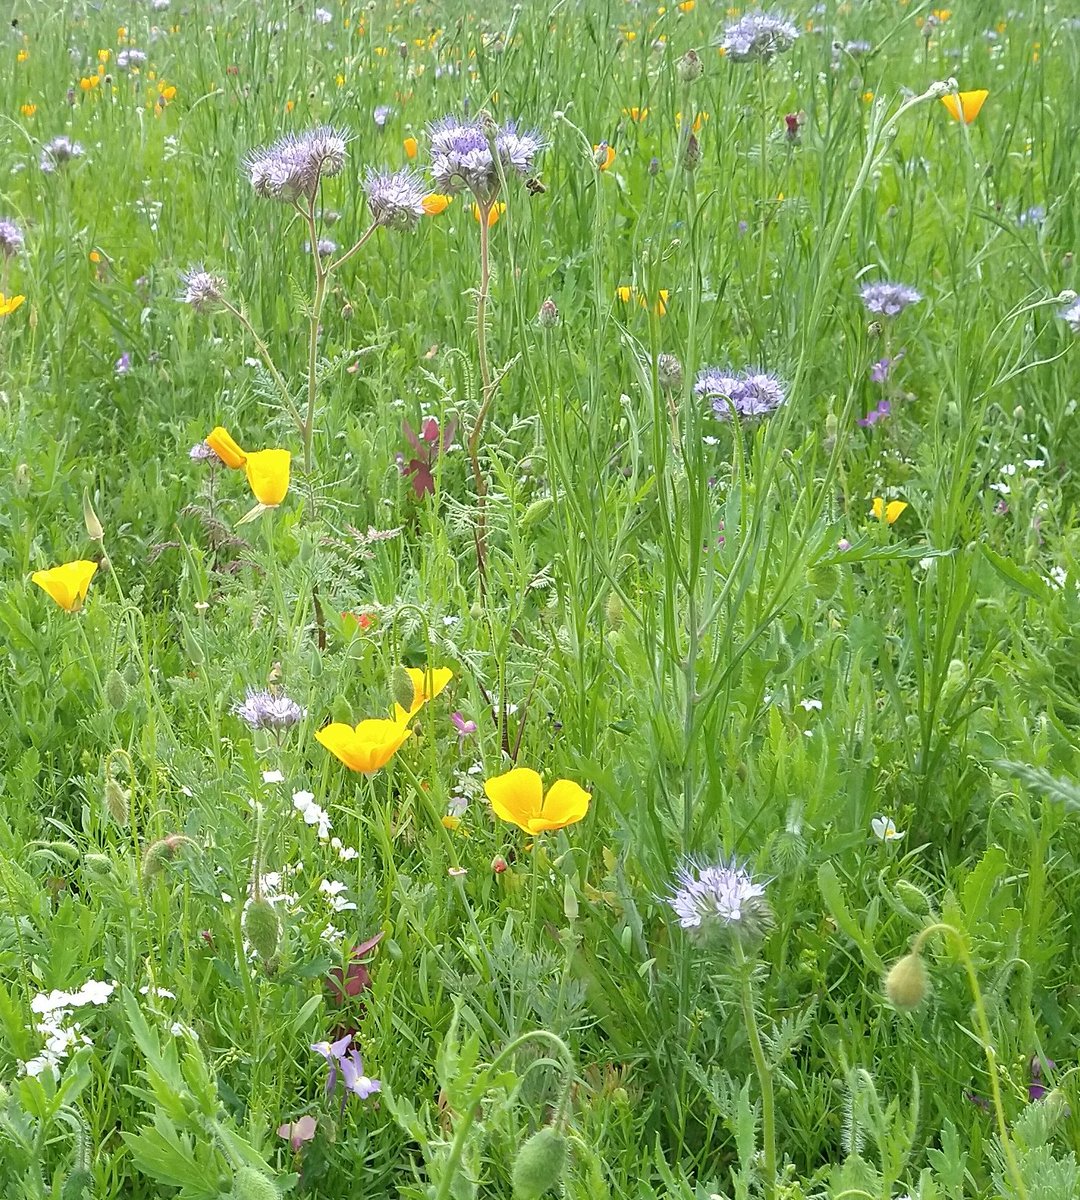 @shypixie76 #wildflower @NTClumberPark photo doesn't give it justice! #FlowerHunting #AdventureTime well worth @VisitNotts